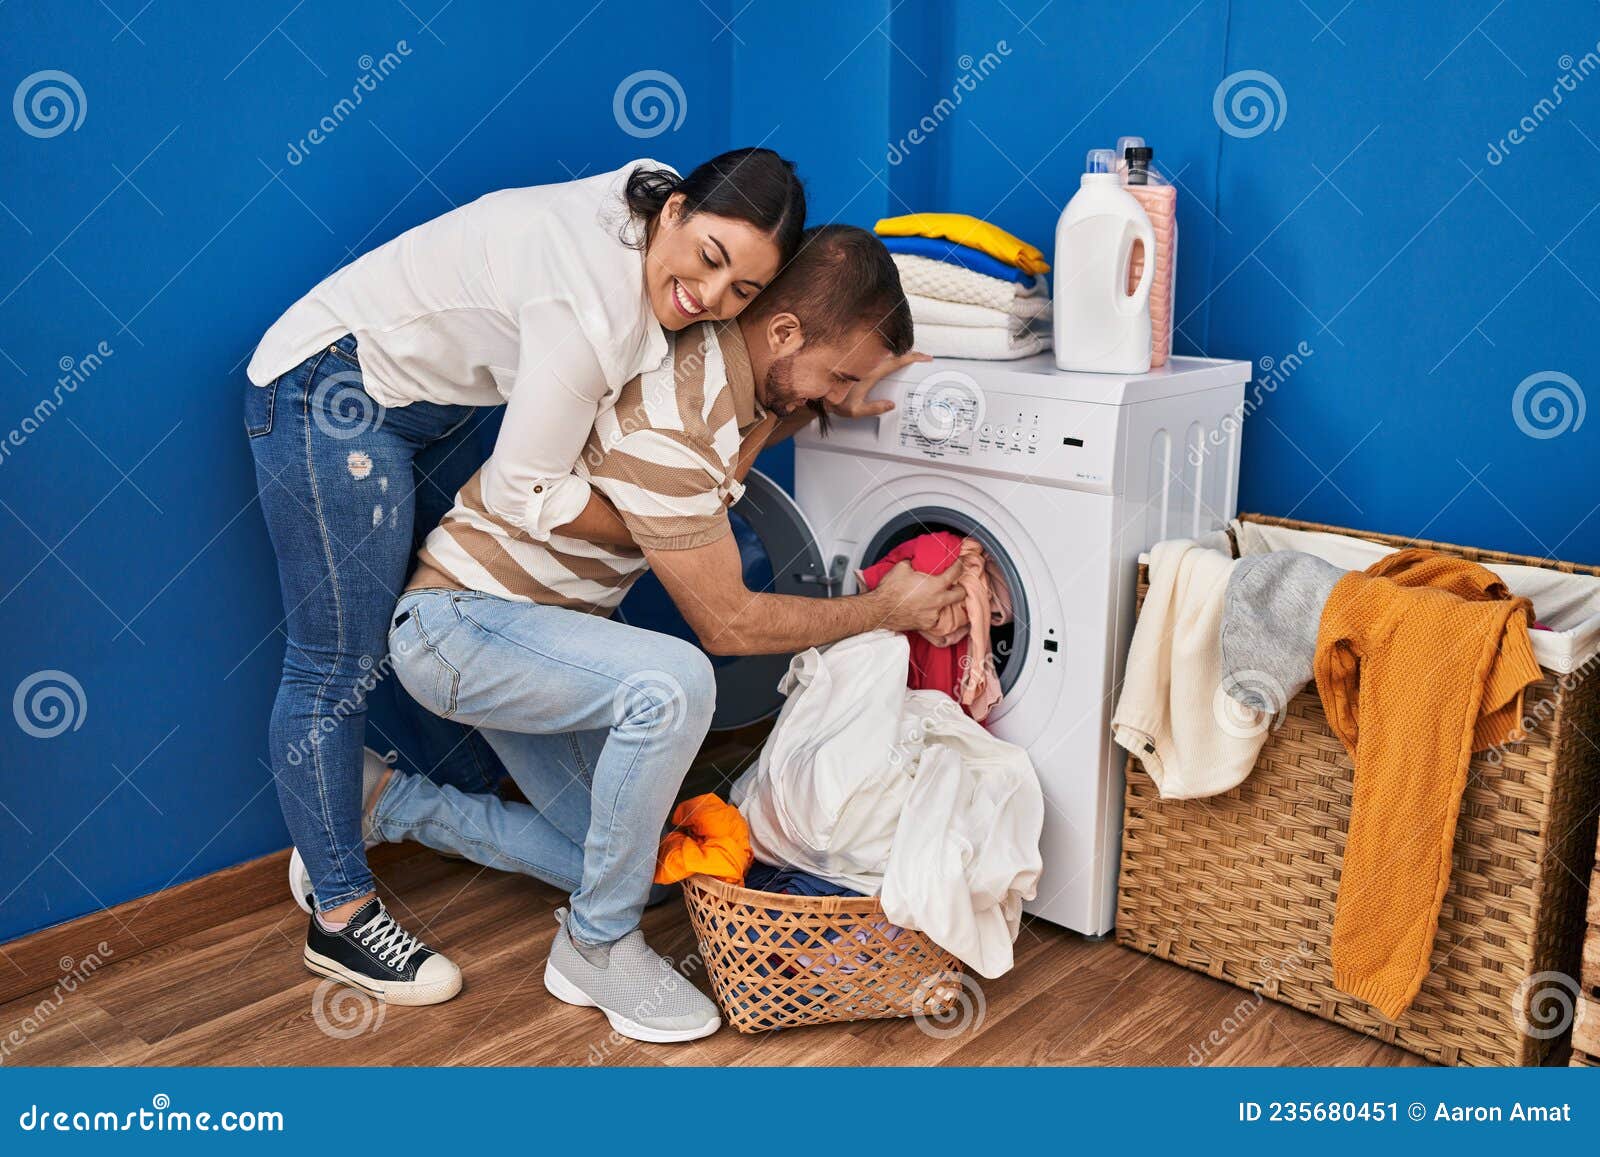 Man And Woman Couple Hugging Each Other Washing Clothes At Laundry Room Stock Image Image Of